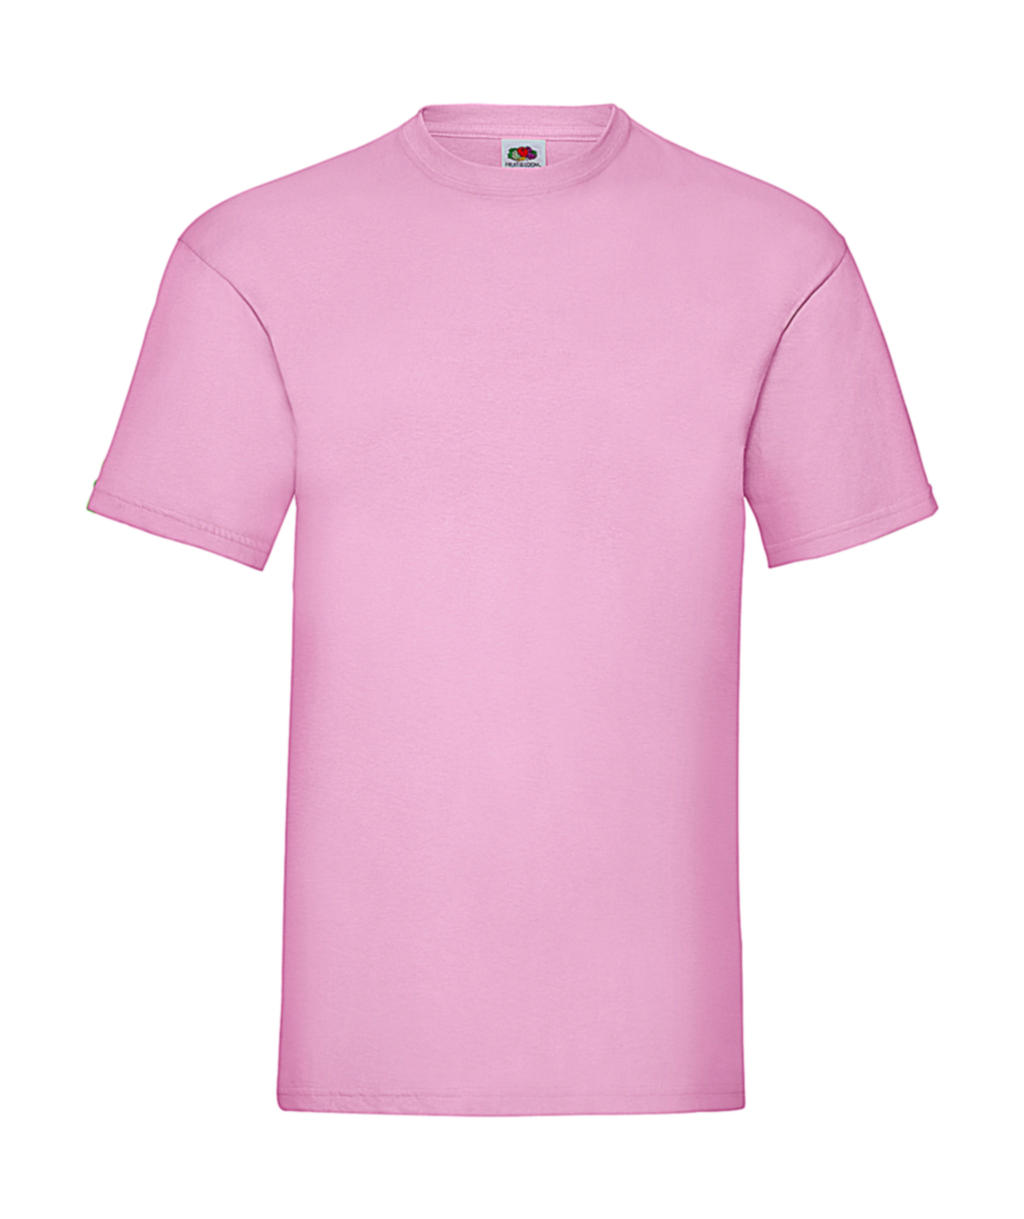  Valueweight Tee in Farbe Light Pink